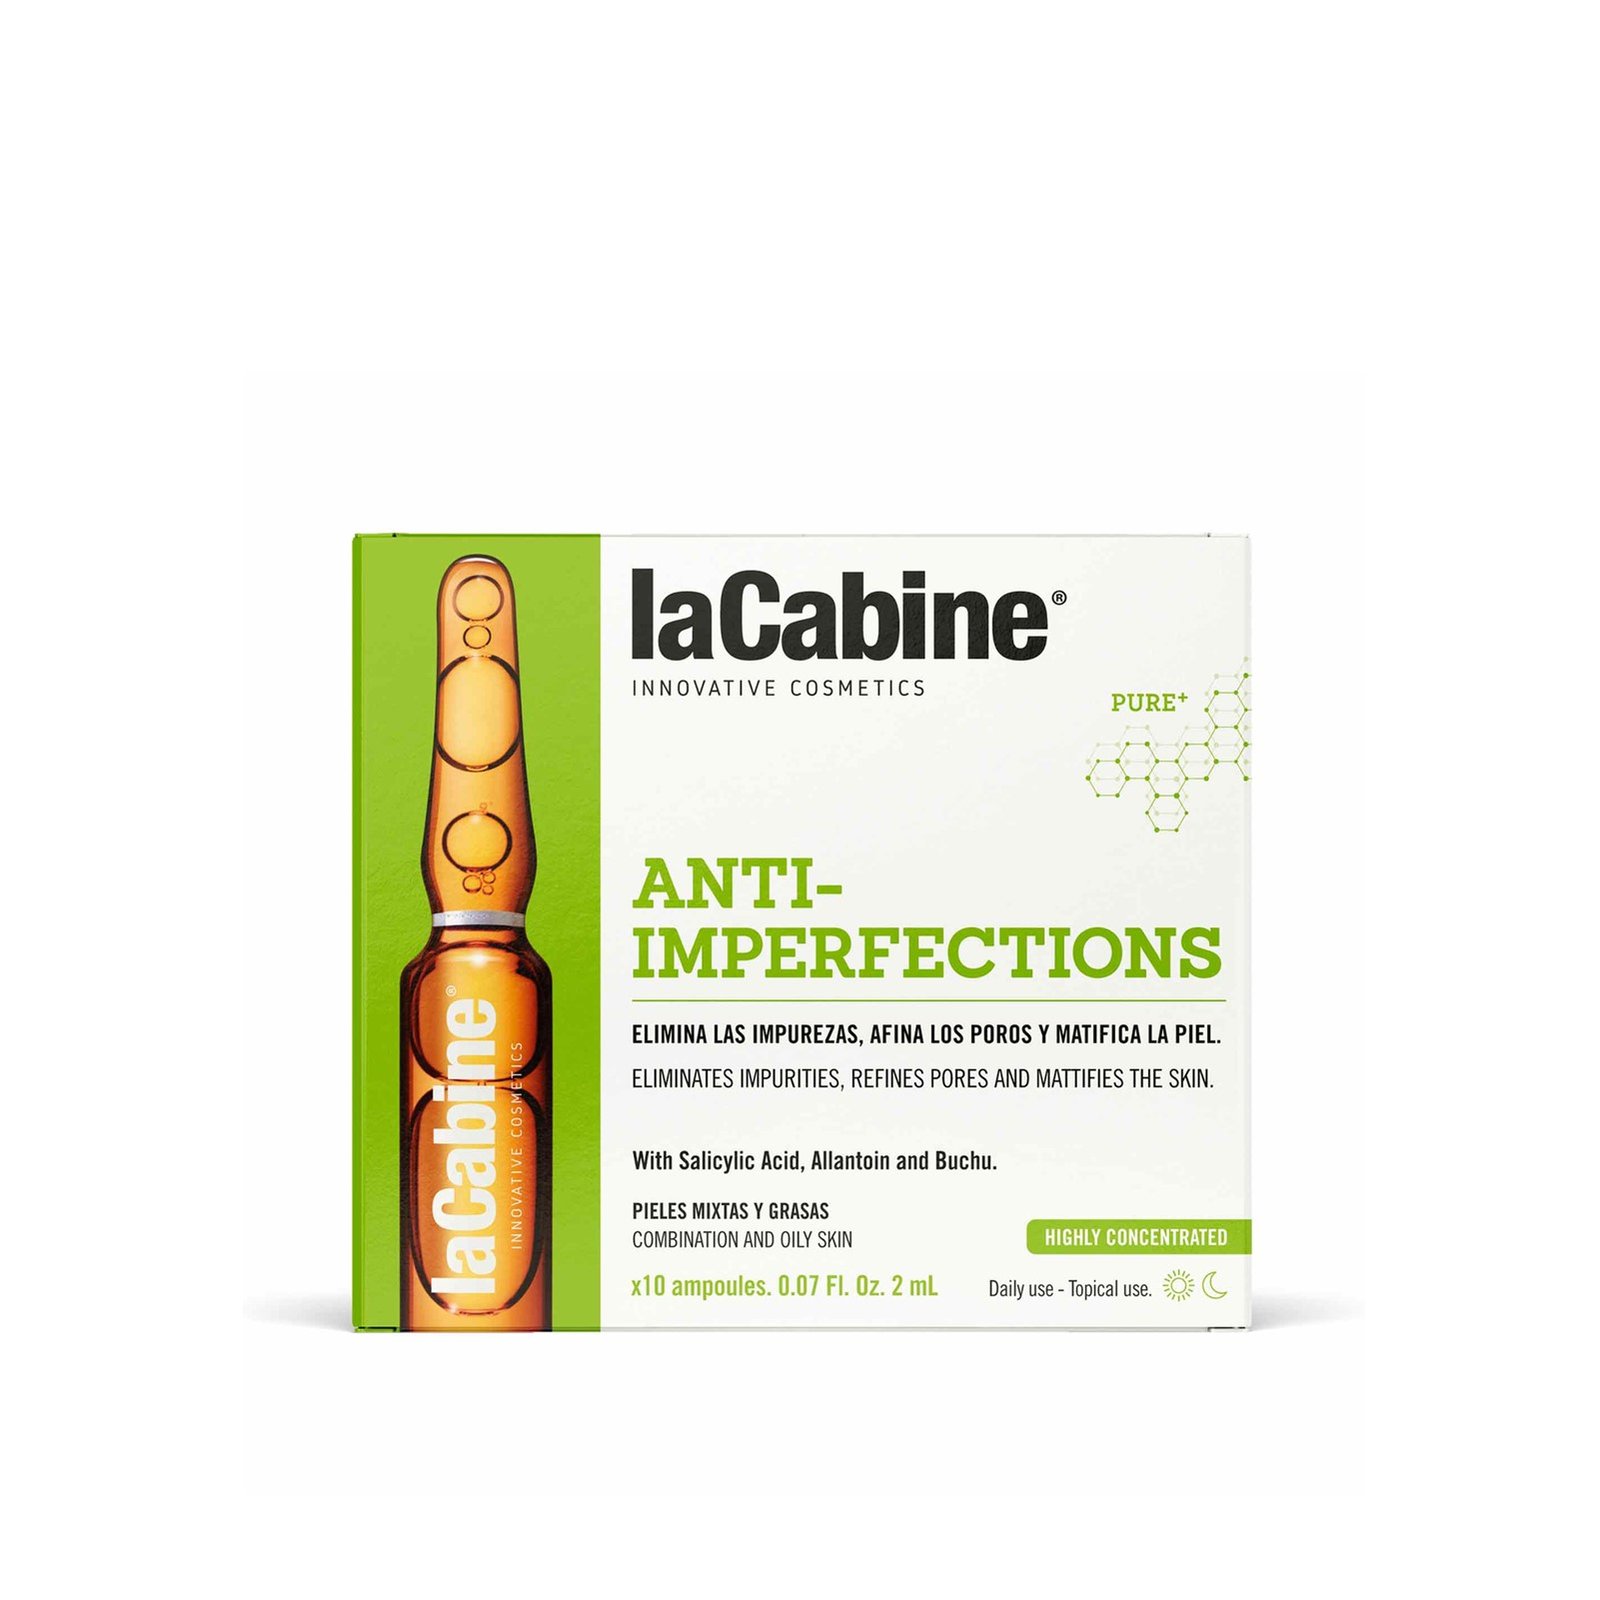 La Cabine Anti-Imperfections Concentrated Ampoules 10x2ml